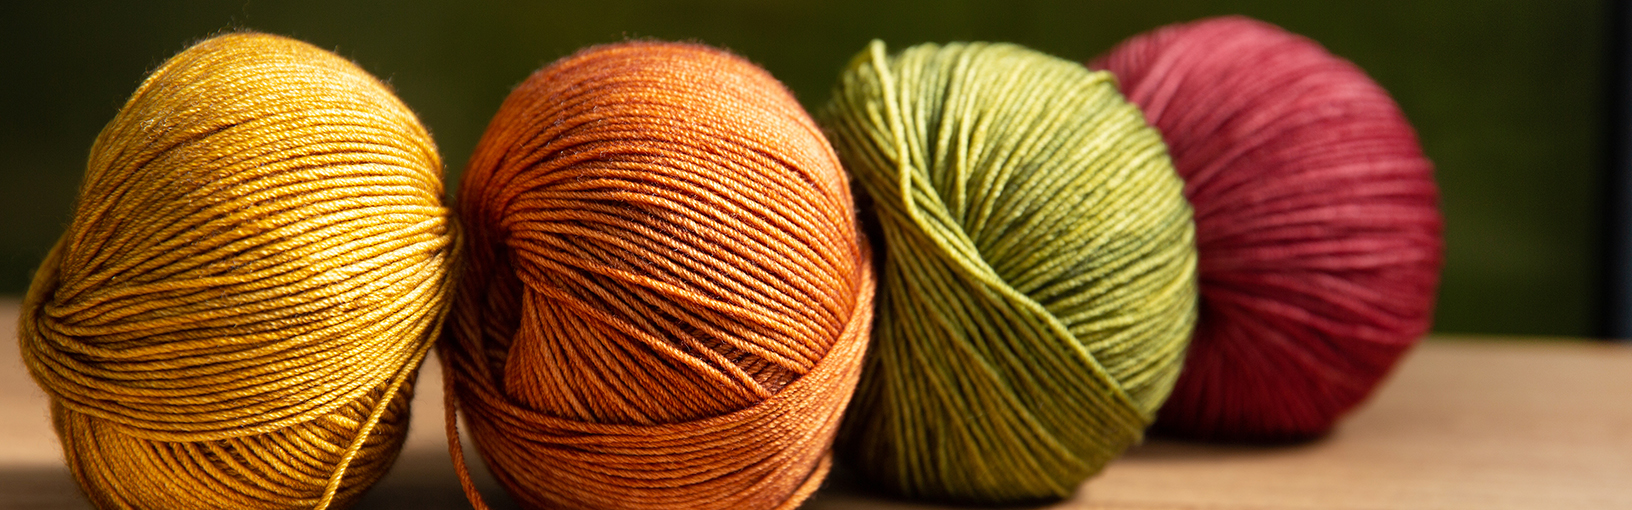 Special items Sale | Sock yarns | Hand-dyed